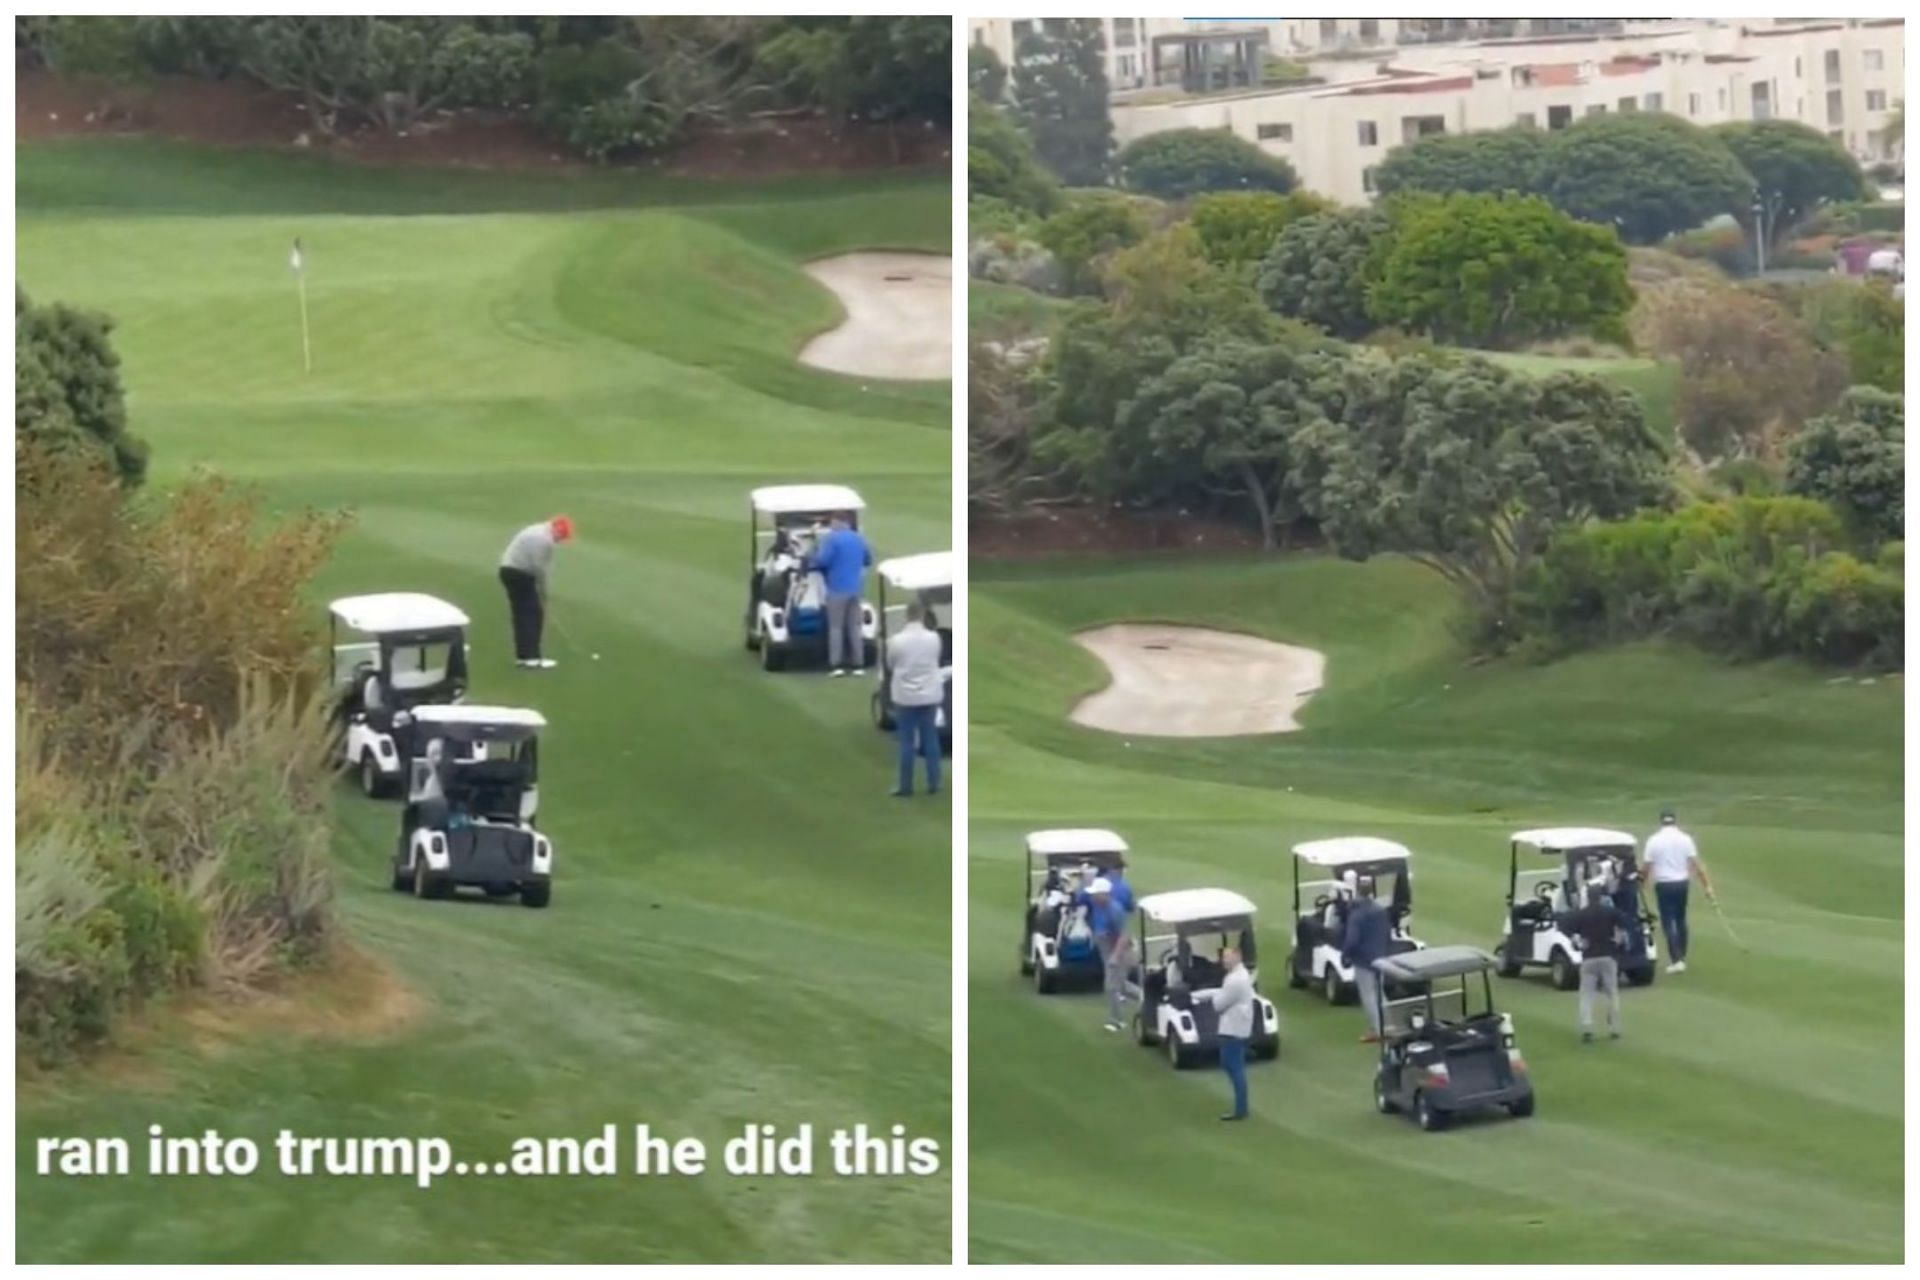 Donald Trump shanked the ball while playing golf (Image via twittet.com/Nuclgolf)